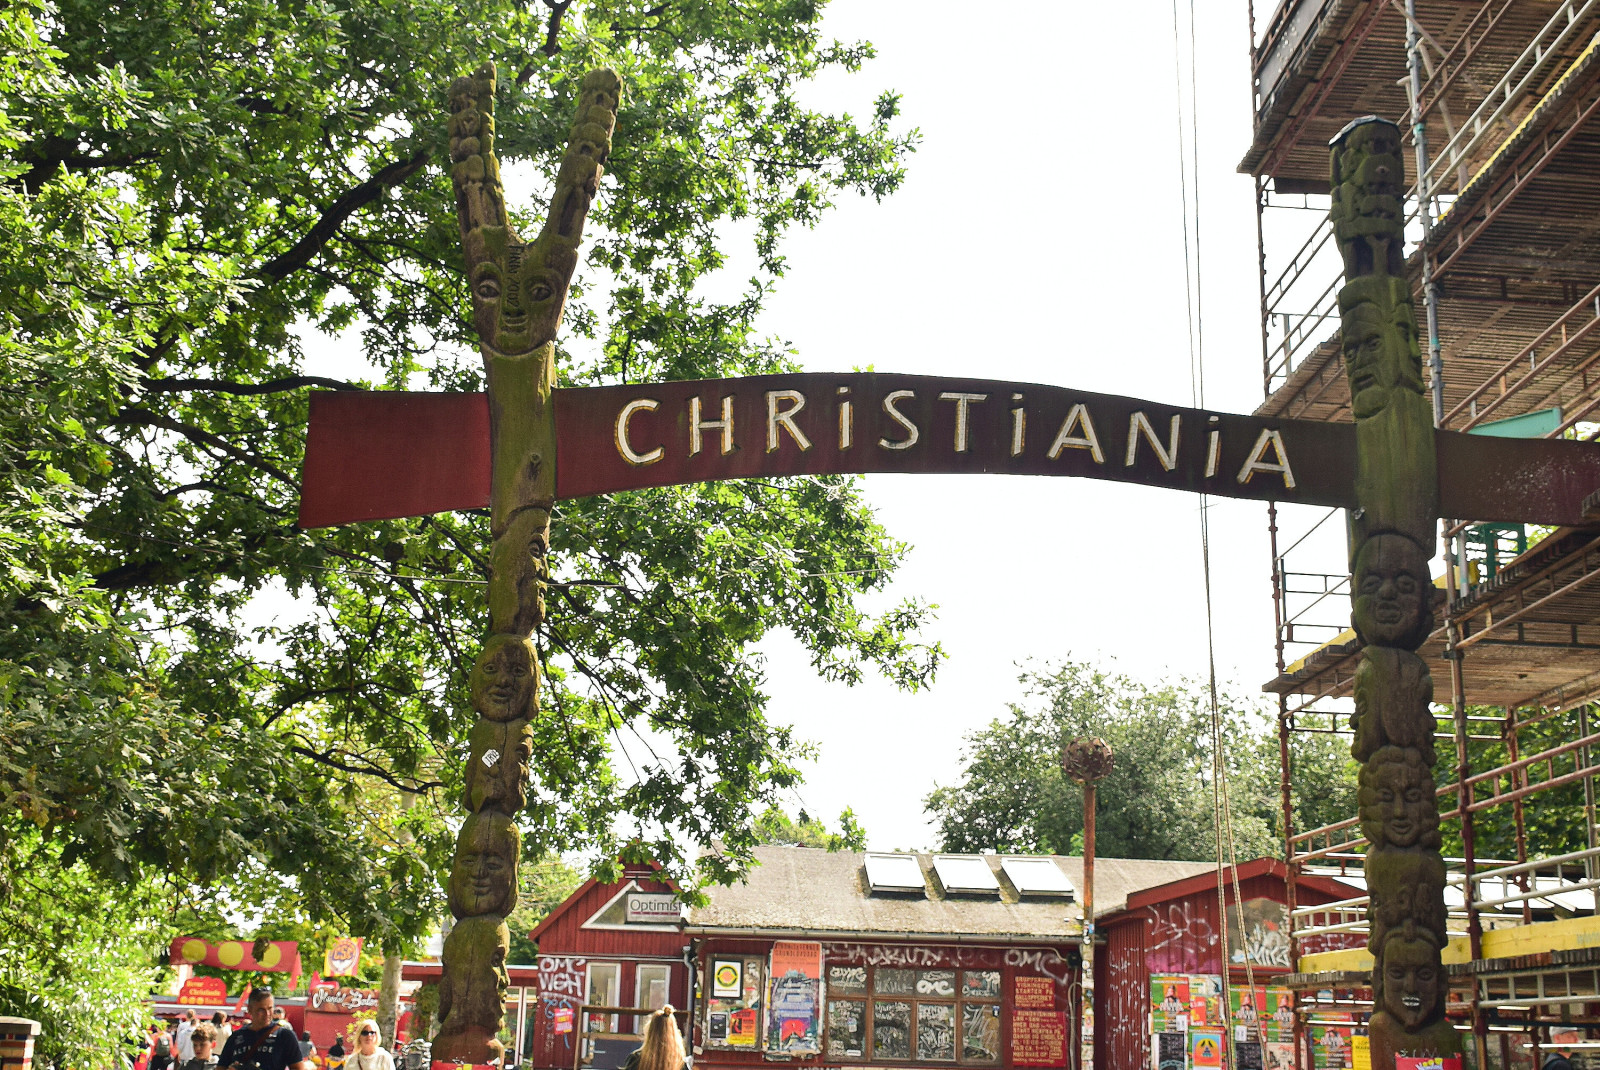 Street in Denmark with tree and sign that reads "Christiana"